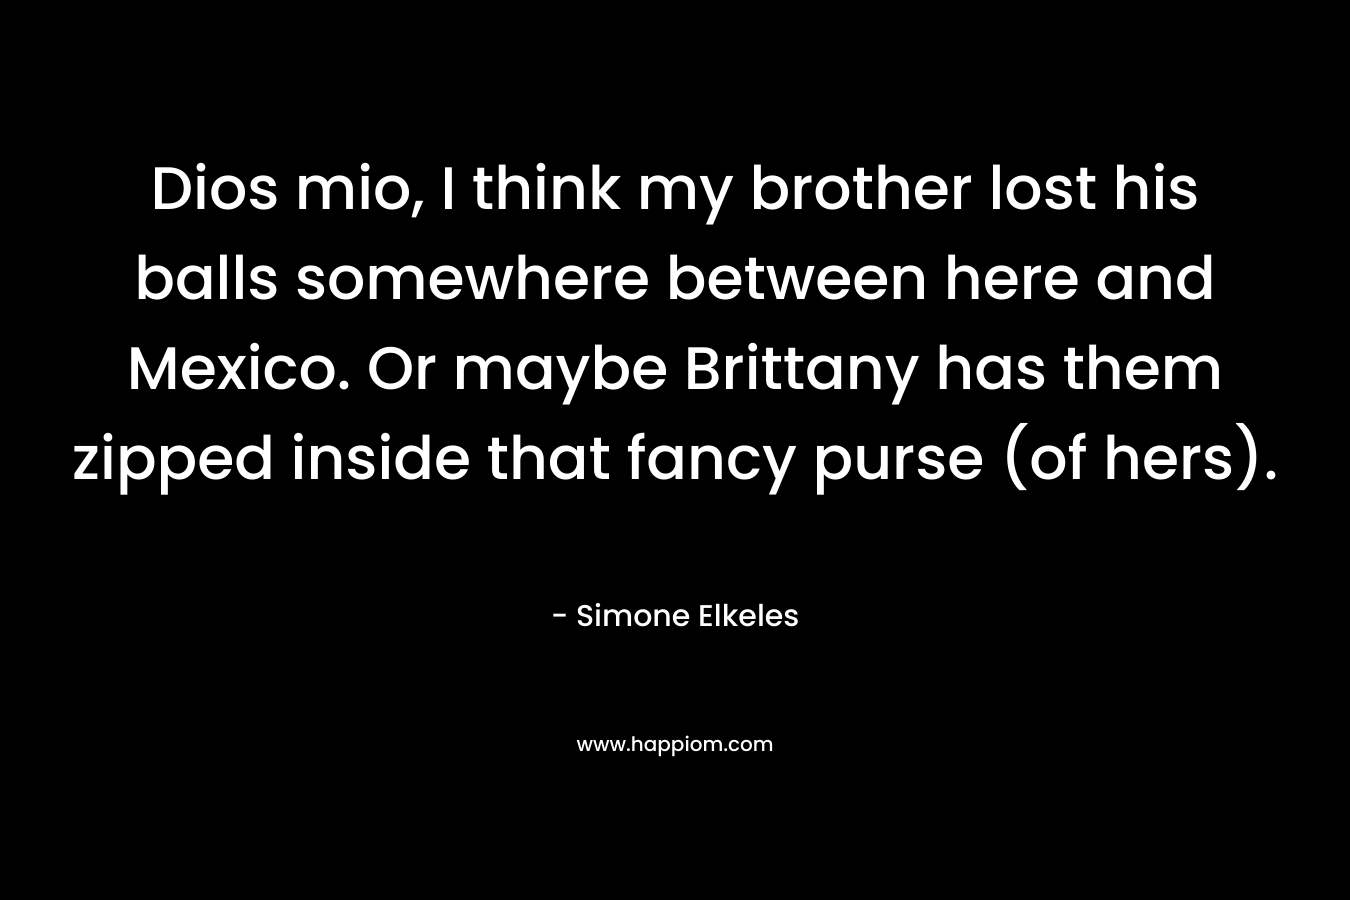 Dios mio, I think my brother lost his balls somewhere between here and Mexico. Or maybe Brittany has them zipped inside that fancy purse (of hers). – Simone Elkeles